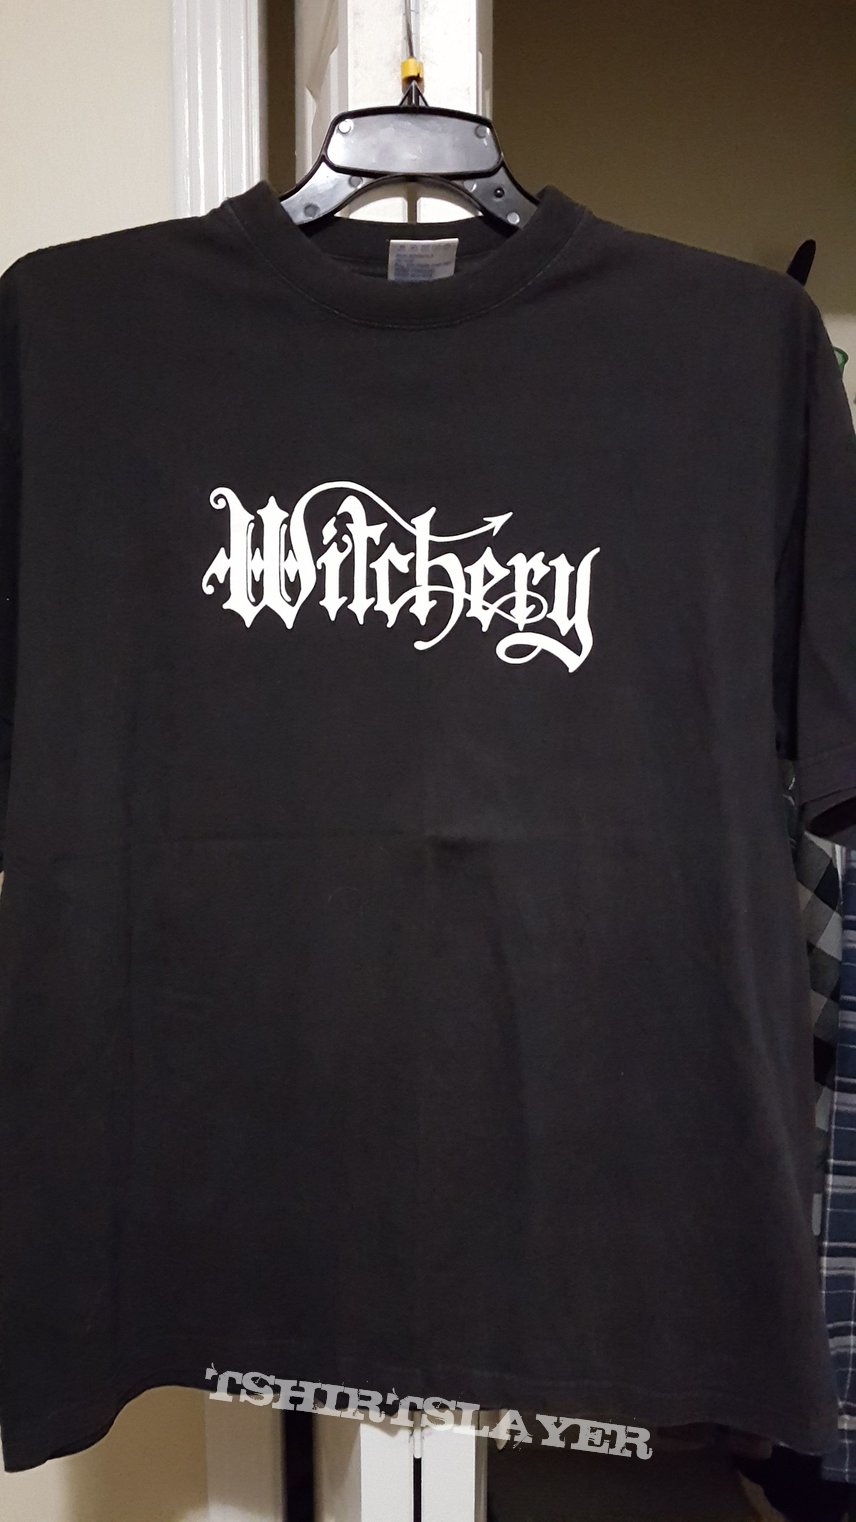 Witchery - Dead, Hot and Live in Europe 2000 tour shirt (XL)